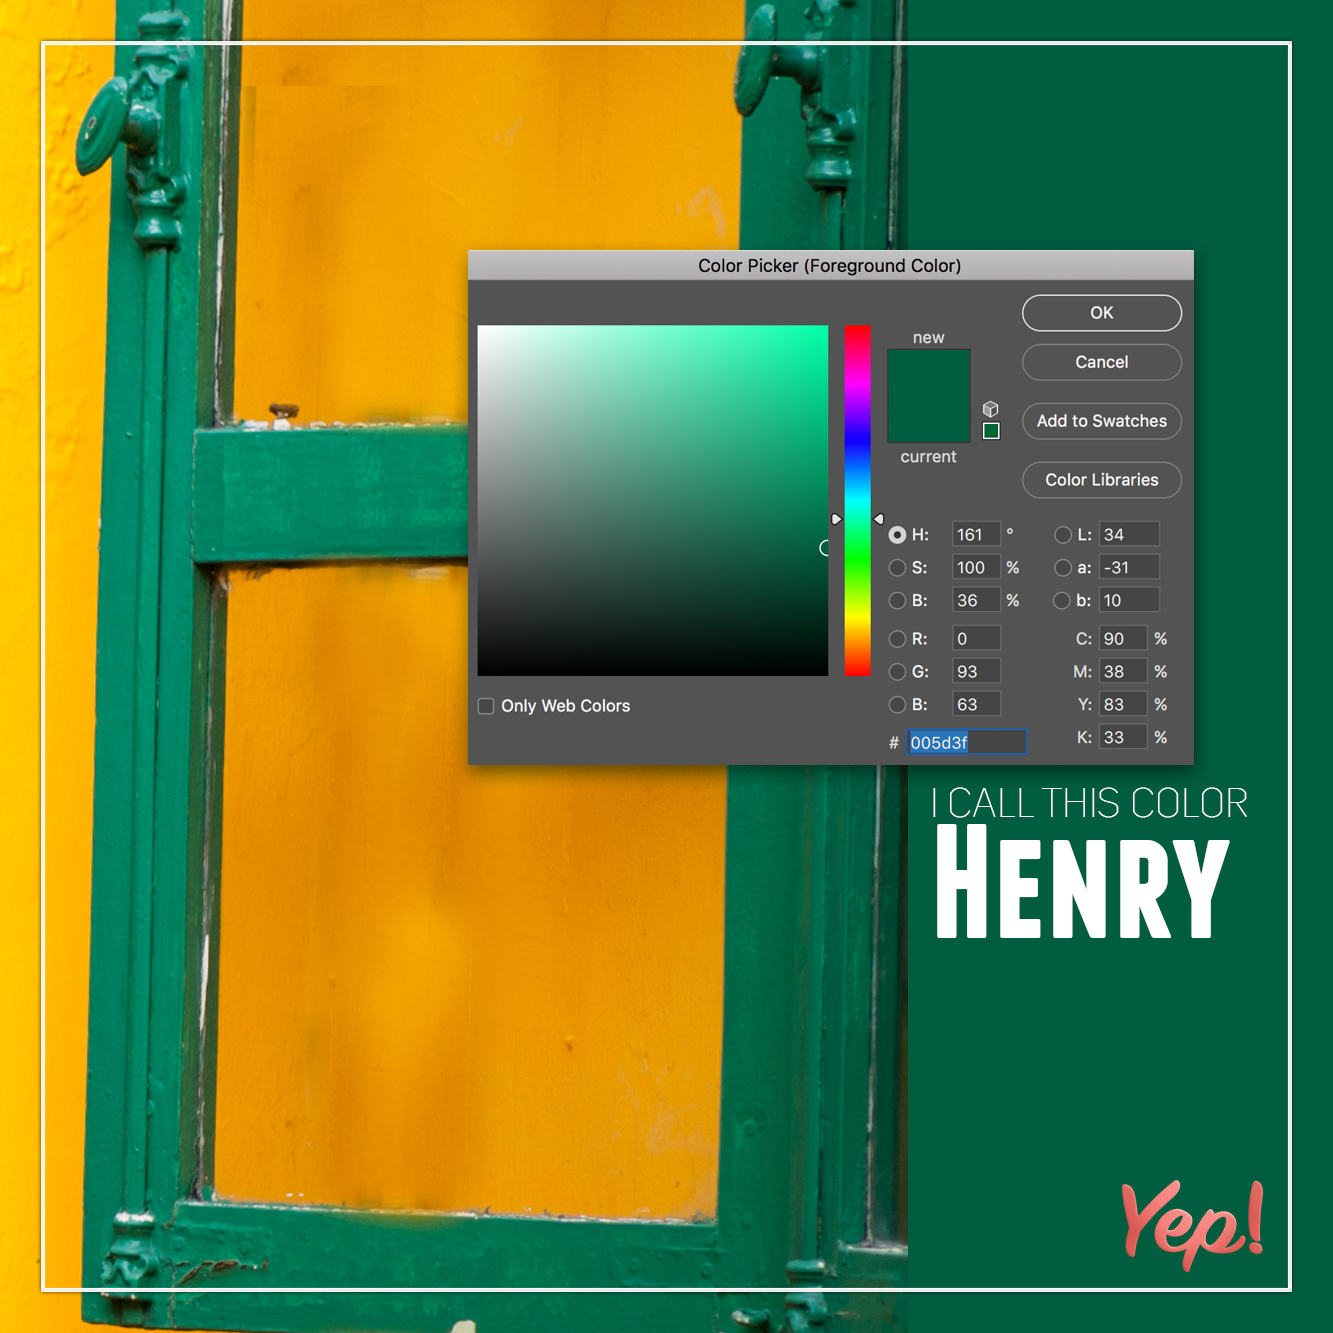 software - Color Picker Foreground Color Ok Cancel Swatches Color Libraries Oh 161 S 900 % 36N | | B 93 L 34 31 10 1 C B M3 Only Web Calon 3003 K 33 I Call This Color Henry Yep!